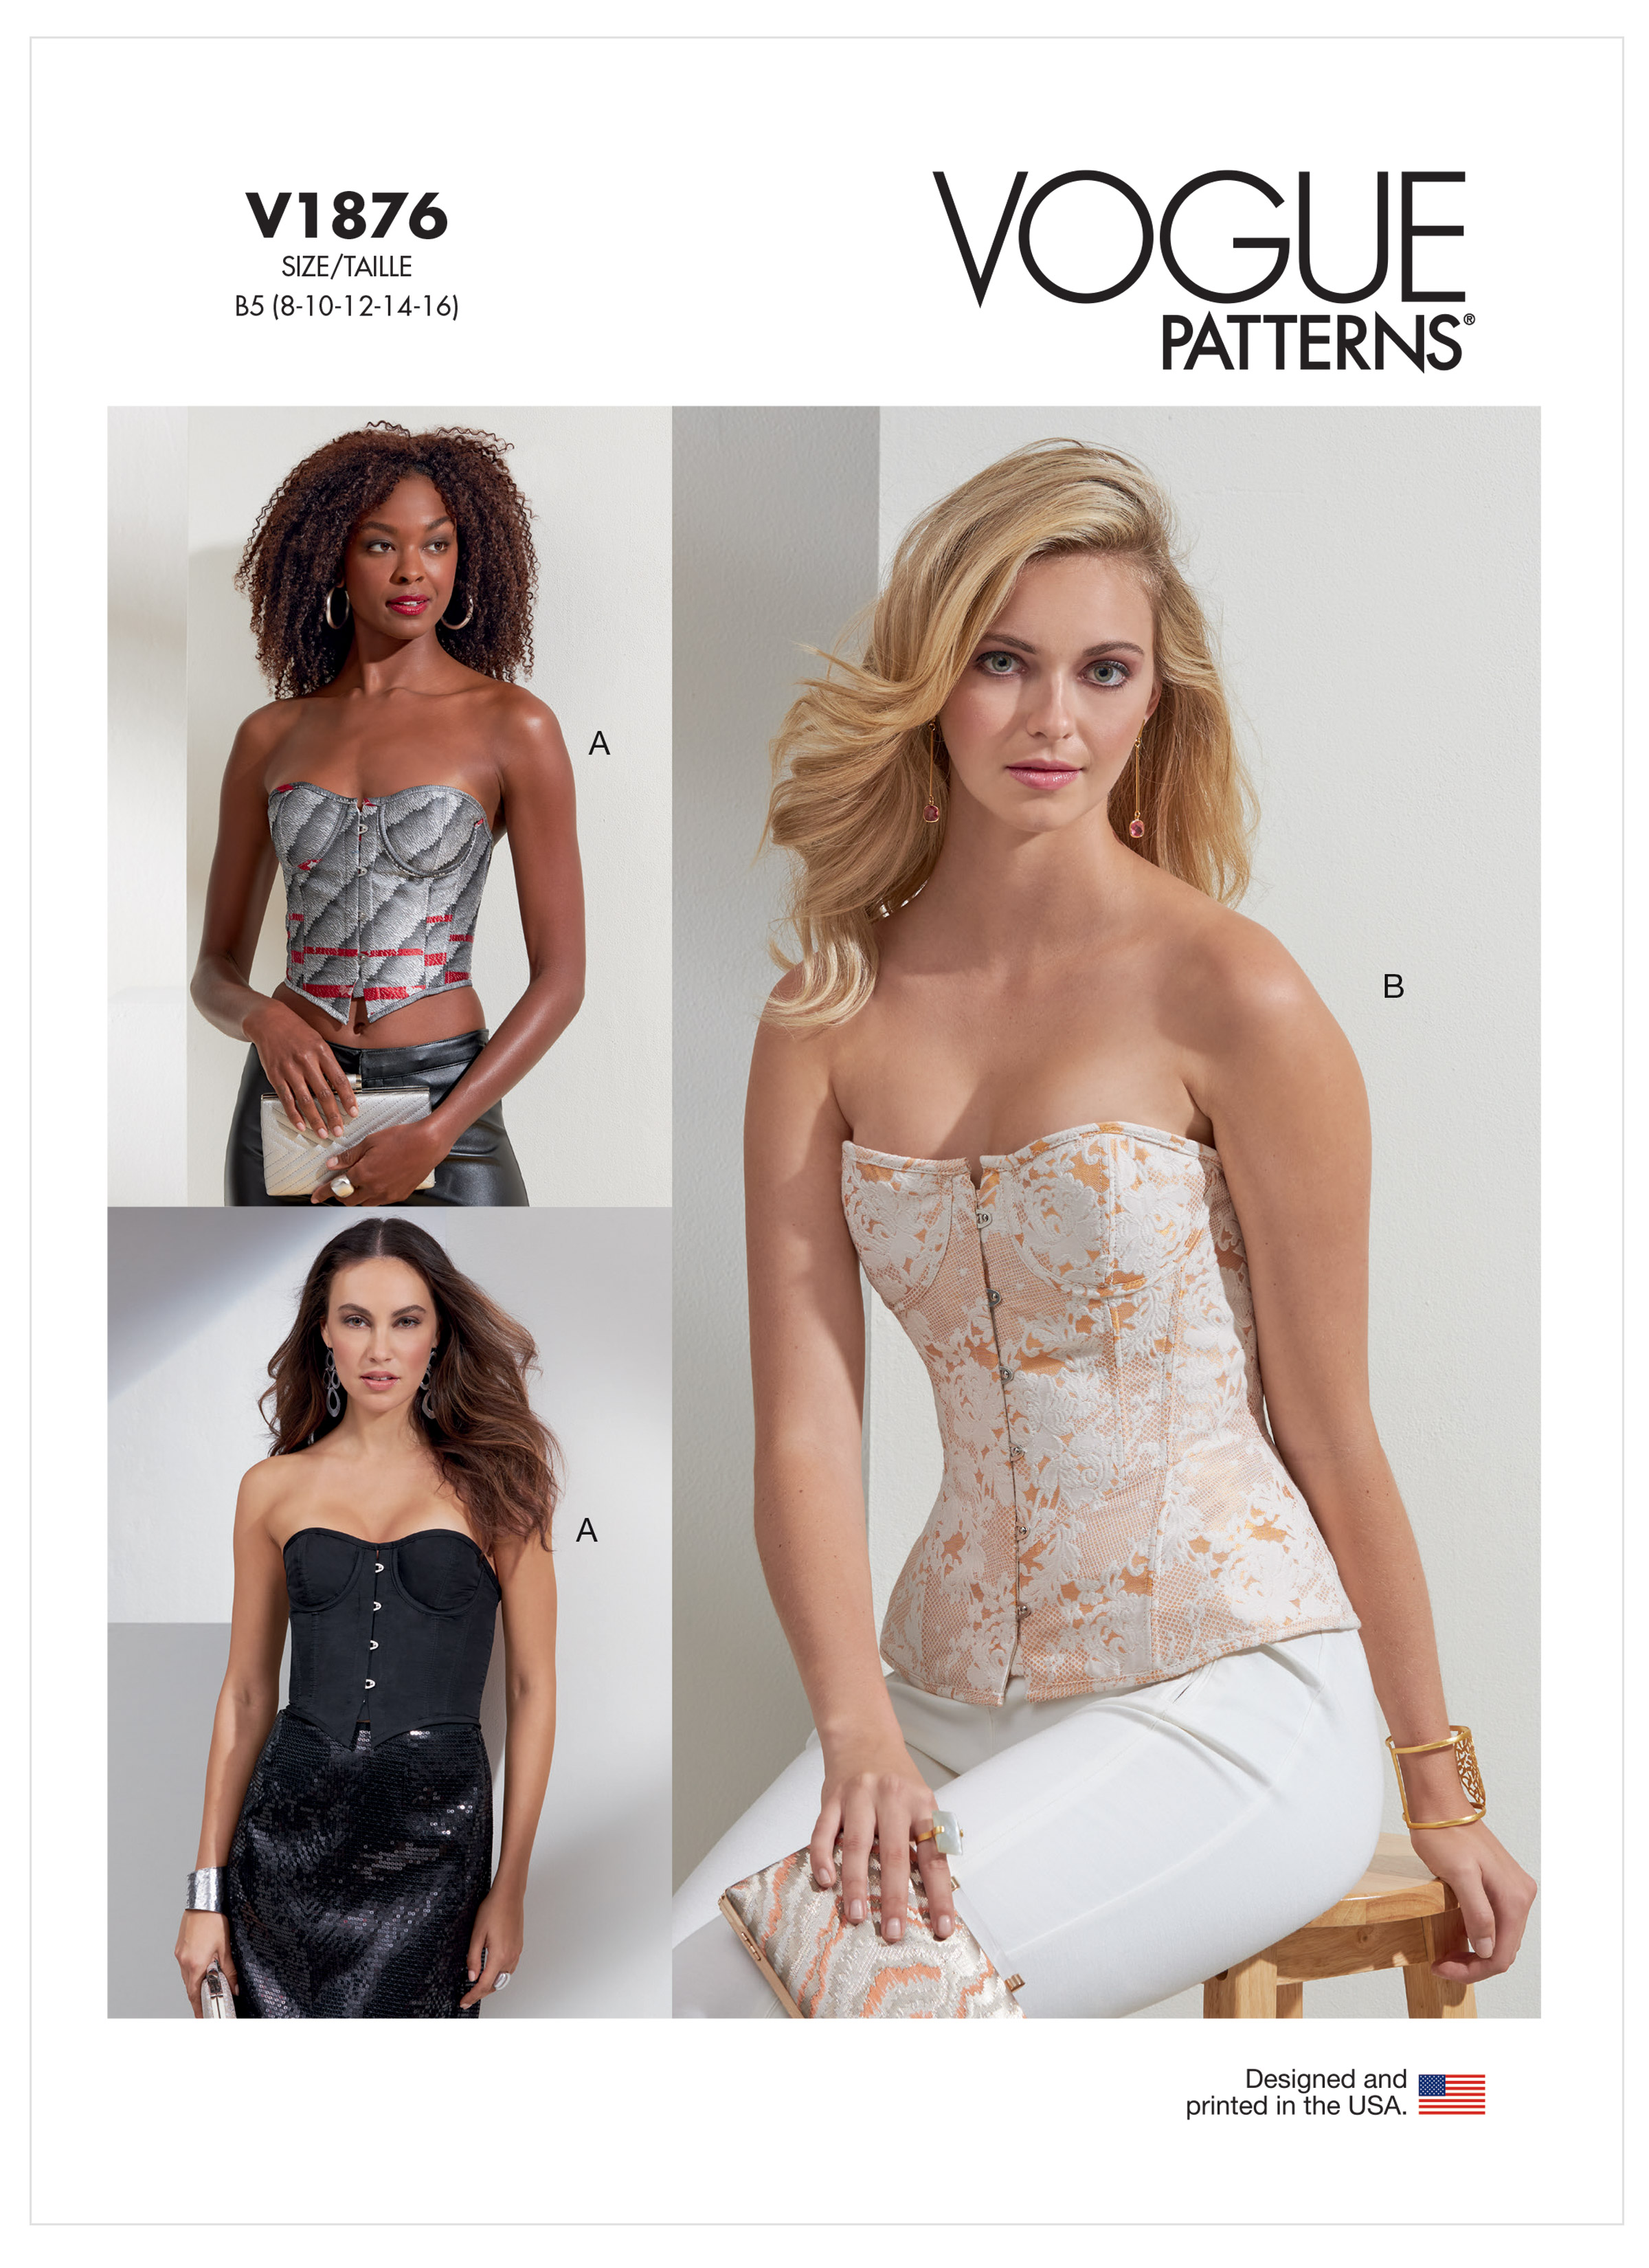 INTRODUCING: THE CORSET PATTERN